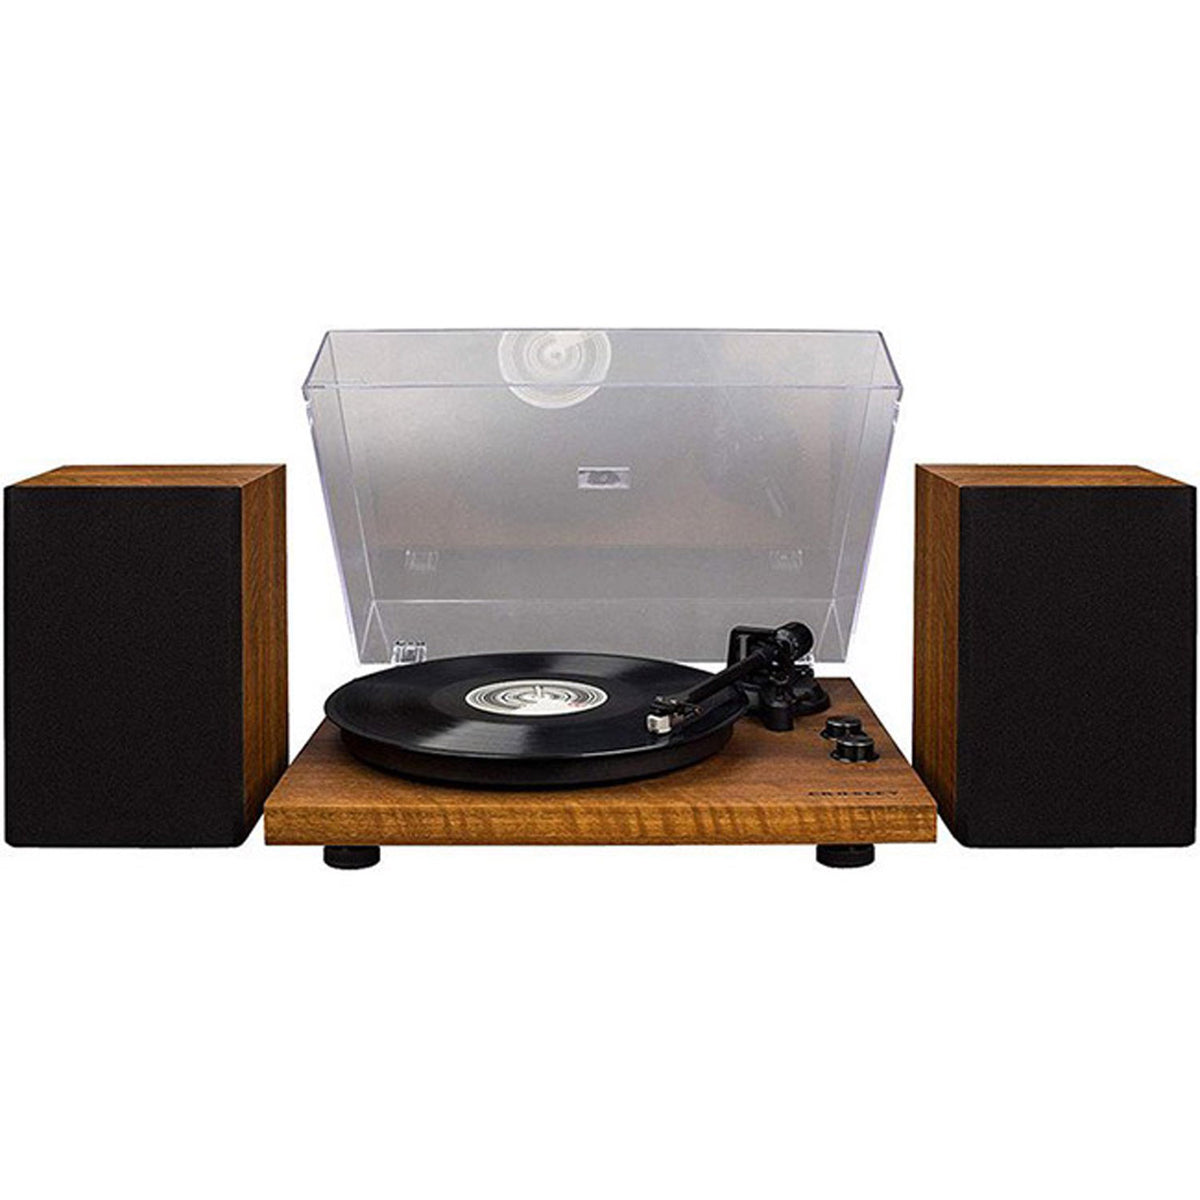 C62 Turntable with Built-In Receiver And Stereo Speakers - Walnut